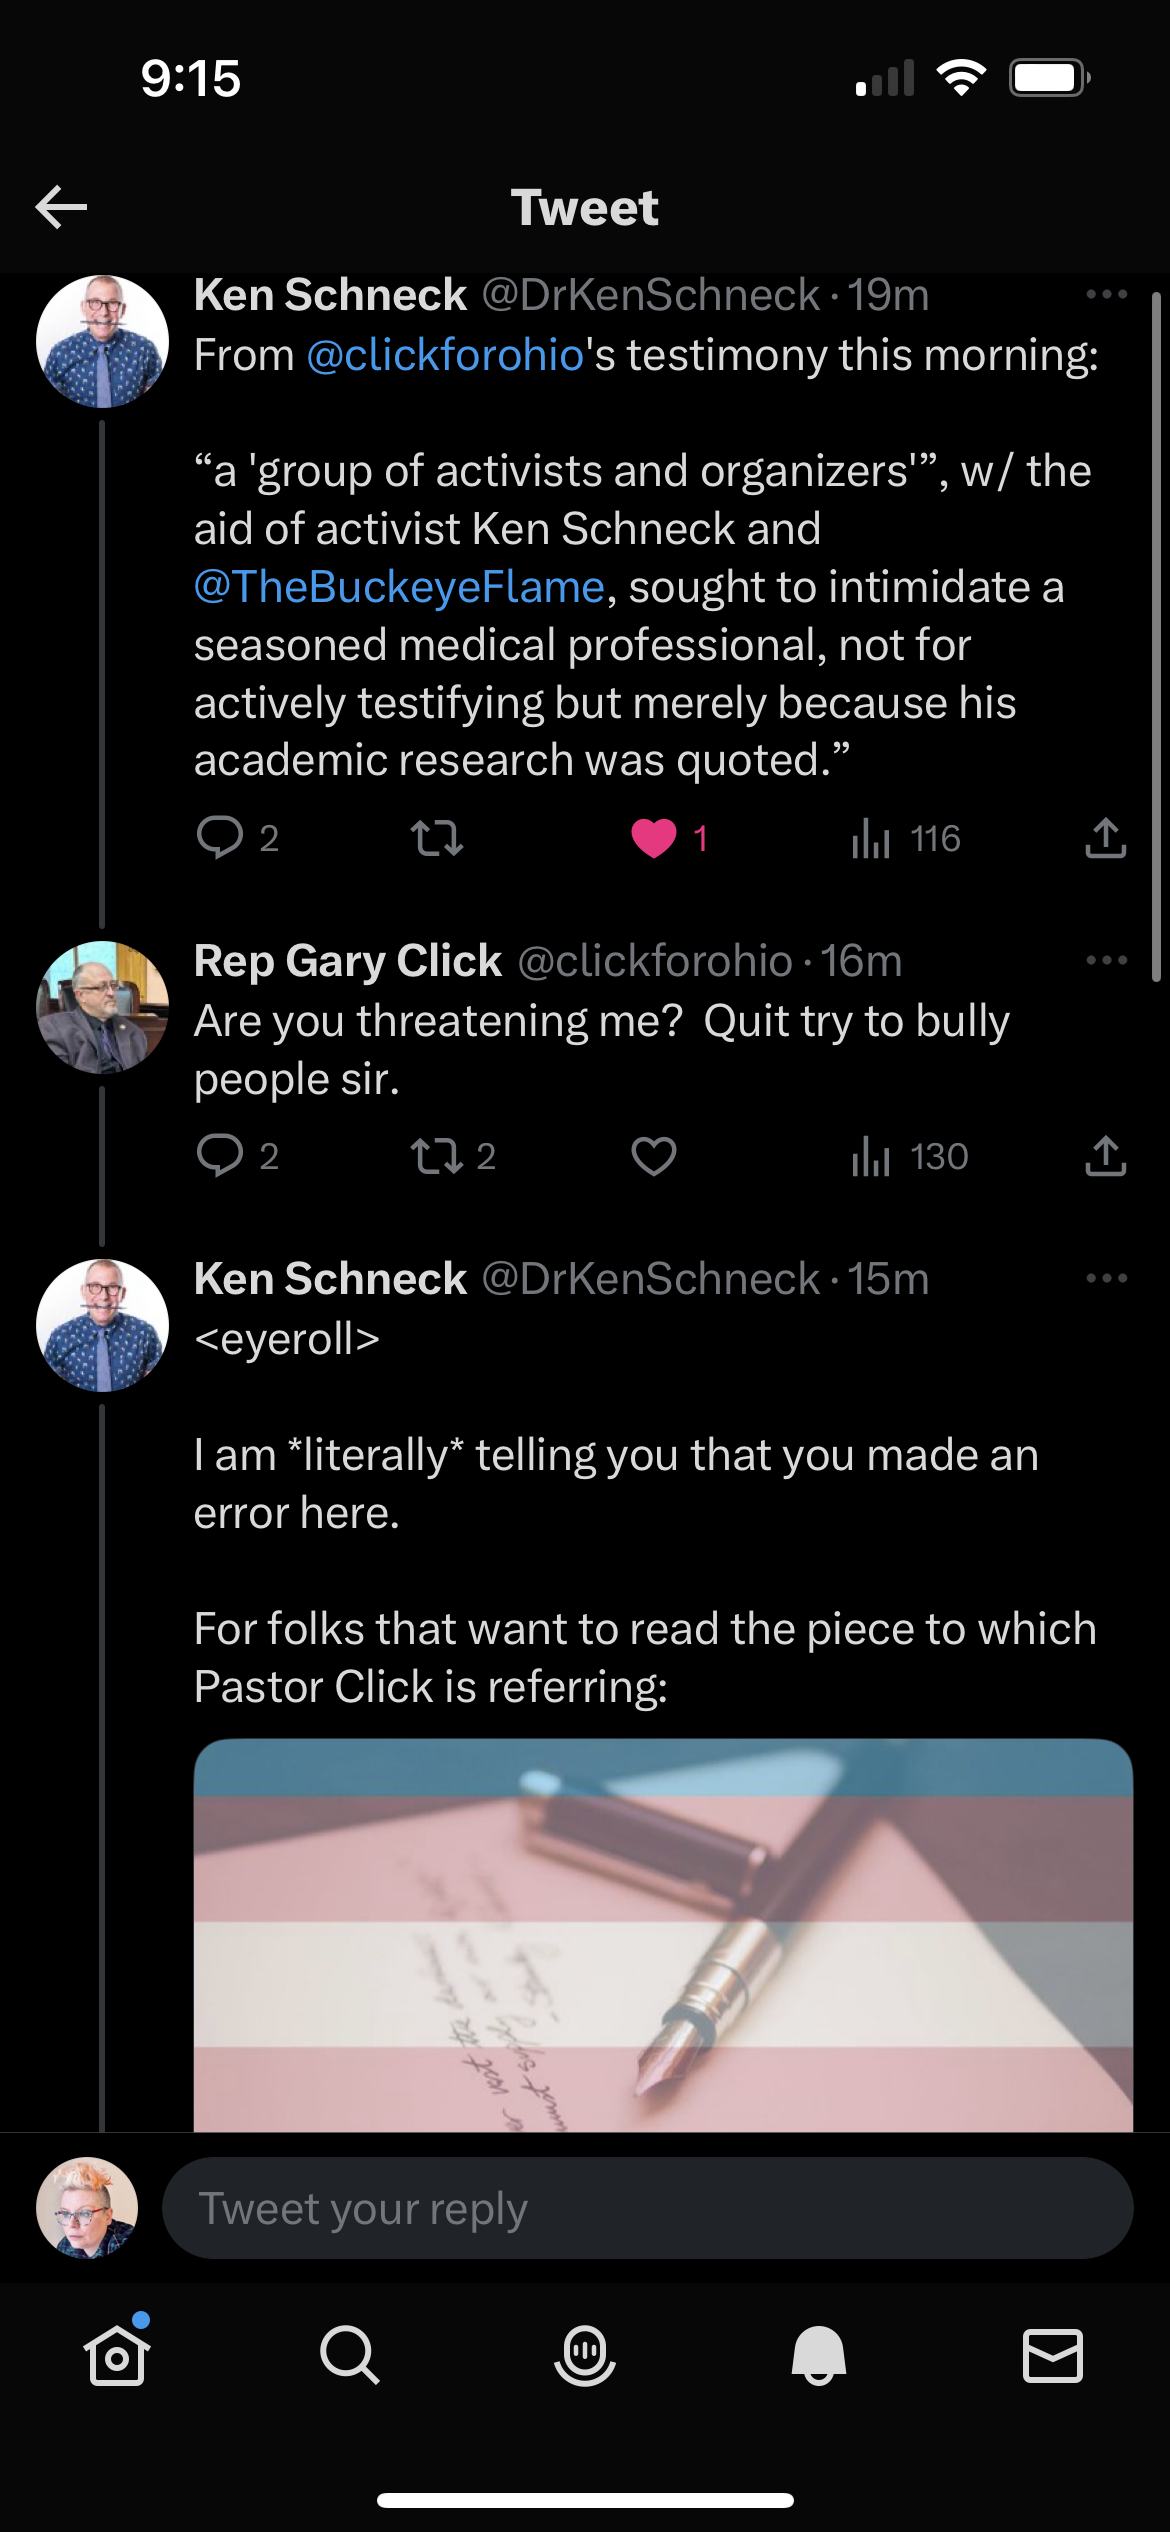 Screen shot from @clickforohio 's testimony this morning: “a 'group of activists and organizers'”, w/ the aid of activist Ken Schneck and @TheBuckeyeFlame , sought to intimidate a seasoned medical professional, not for actively testifying but merely because his academic research was quoted.” 8:56 AM · Apr 19, 2023 2,626 Views from at Dr Ken Schneck: You made a huge error here, sir. 8:56 AM · Apr 19, 2023 From at click for ohio: Are you threatening me? Quit try to bully people sir. 8:58 AM · Apr 19, 2023@DrKenSchneck I am *literally* telling you that you made an error here. For folks that want to read the piece to which Pastor Click is referring: (link to the Buckeye Flame) @clickforohio For some reason, my knew you would be proud of getting mentioned and somehow validated. It’s not a good look for you to be out there trying to intimidate people. 9:04 AM · Apr 19, 2023 from Dr Schneck: You used the power of your office to make accusations (that are PROVABLY FALSE) in the public record. If that's not bullying... I am *embarrassed* for you, pastor. 9:06 AM · Apr 19, 2023